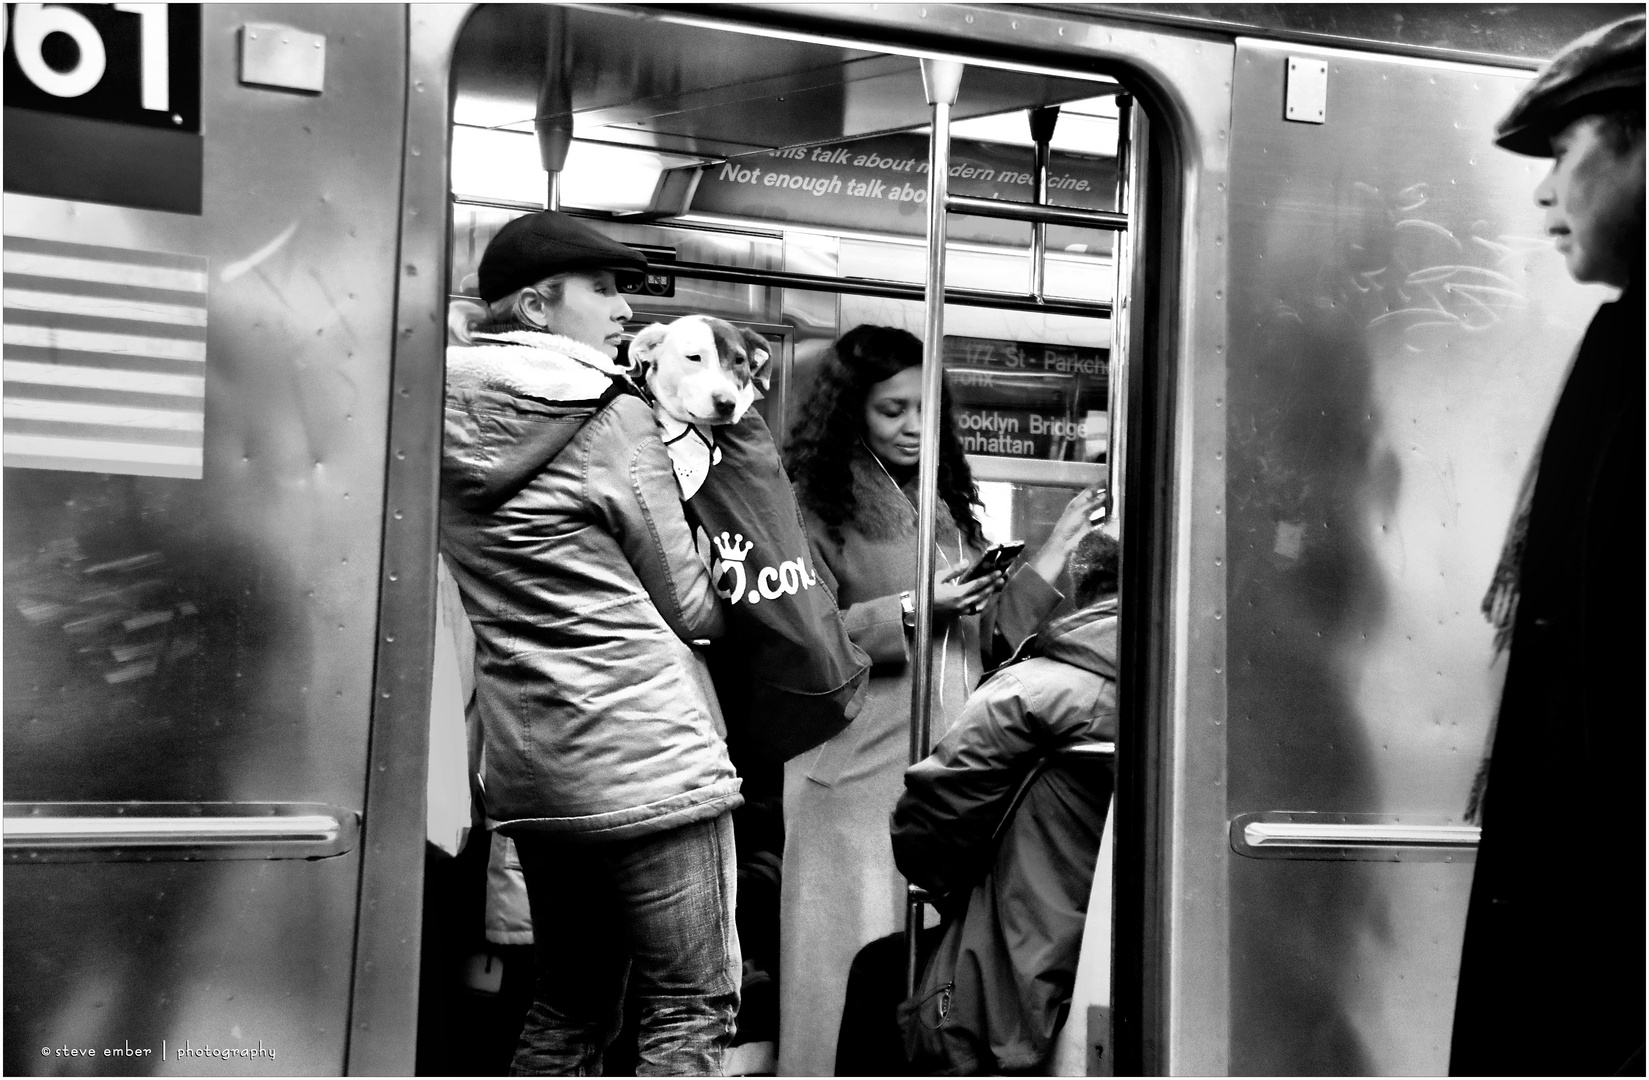 Best Friends on a 6 Train - A New York Moment